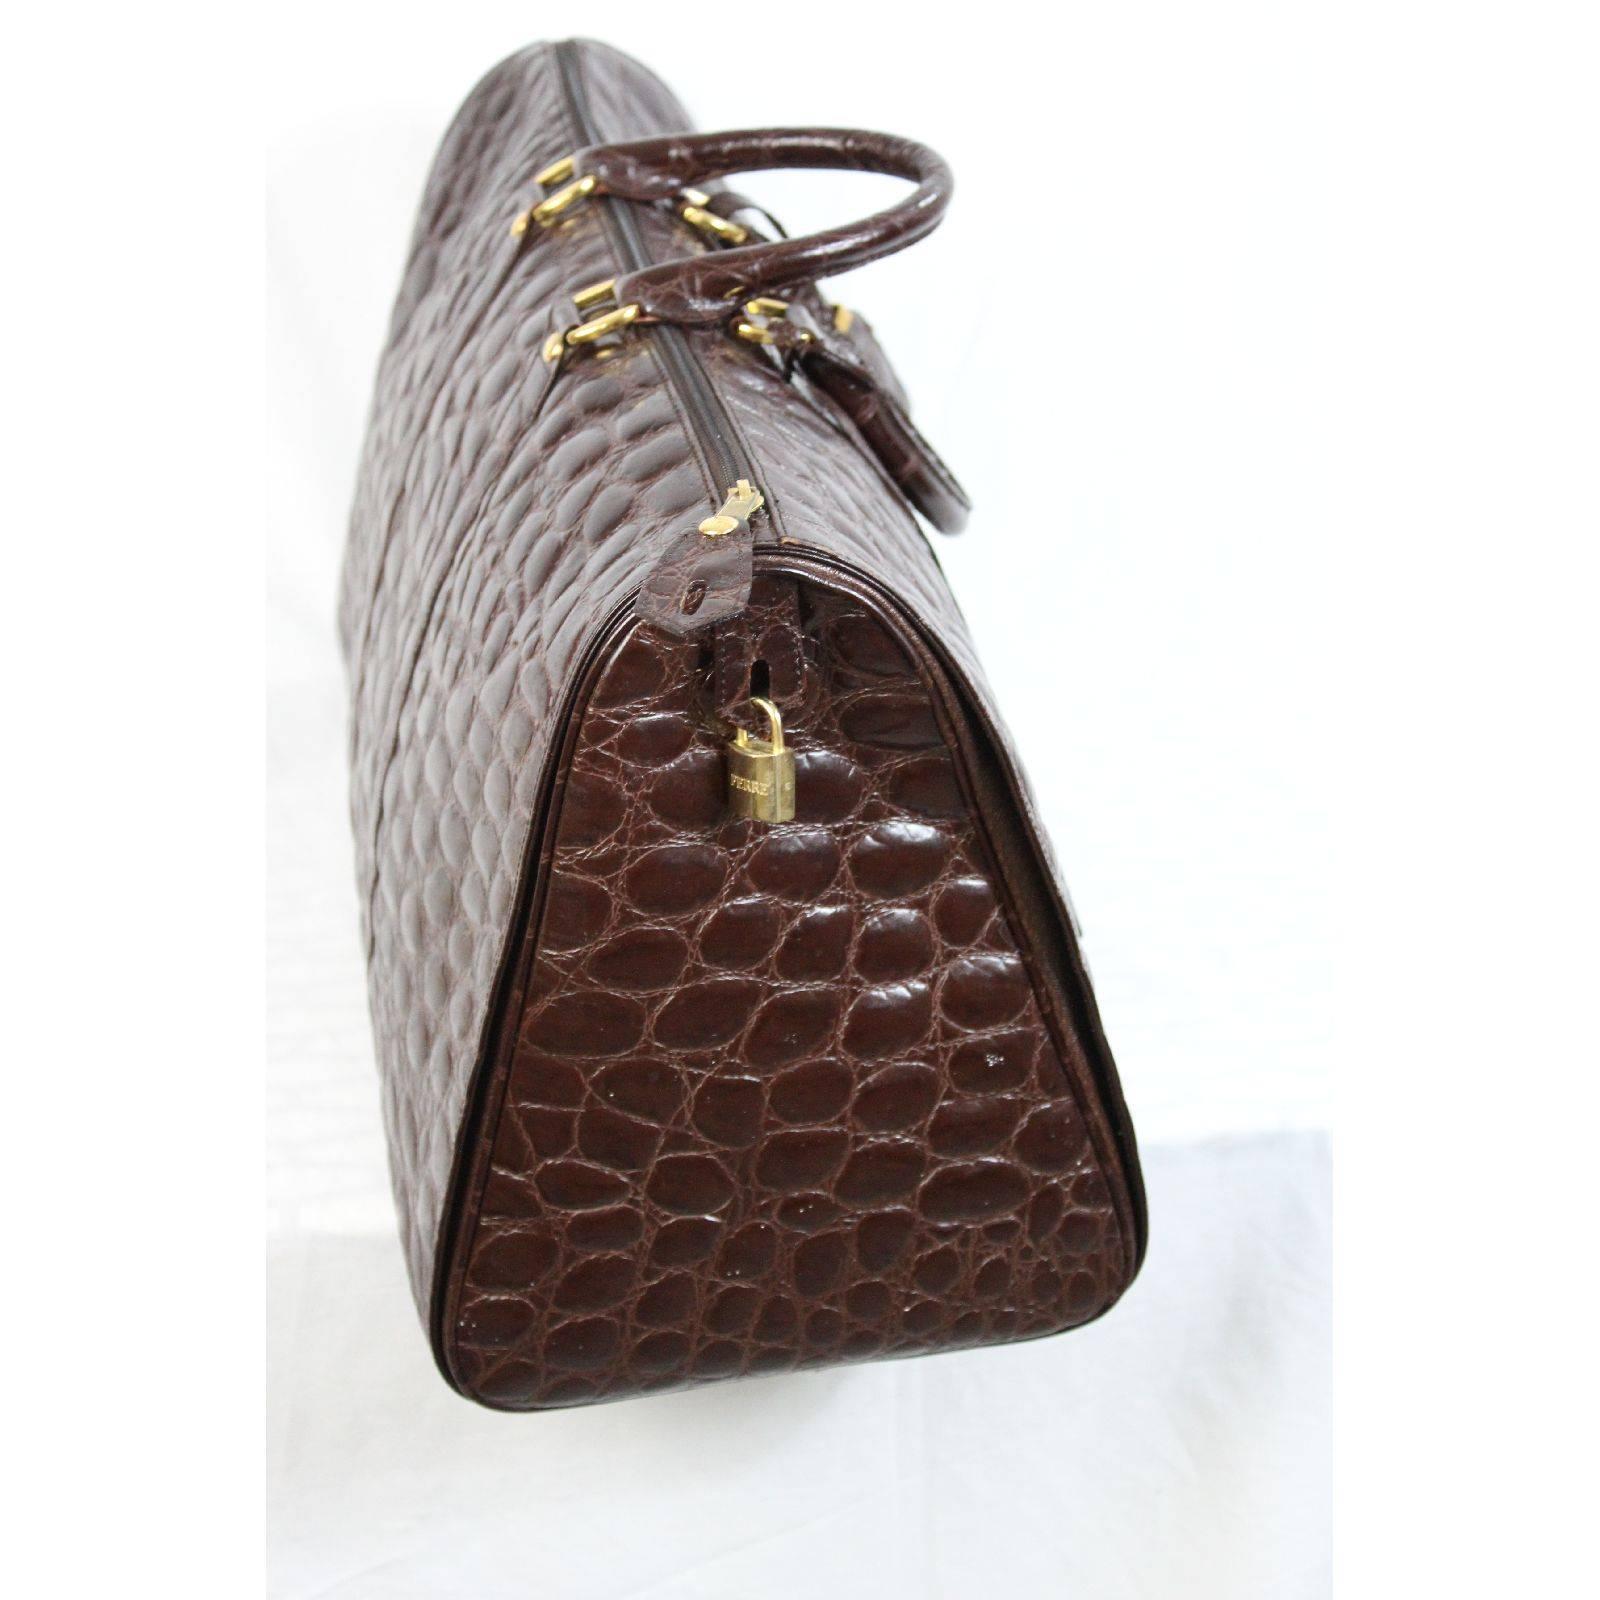 Gianfranco Ferre travel bag, brown in calfskin, embossed crocodile print. Strong handles, keys and golden padlock. Golden plate with serial number, inside canvas with logo pocket. Excellent vintage conditions. Shopping label.

Height: 34 cm
Width: